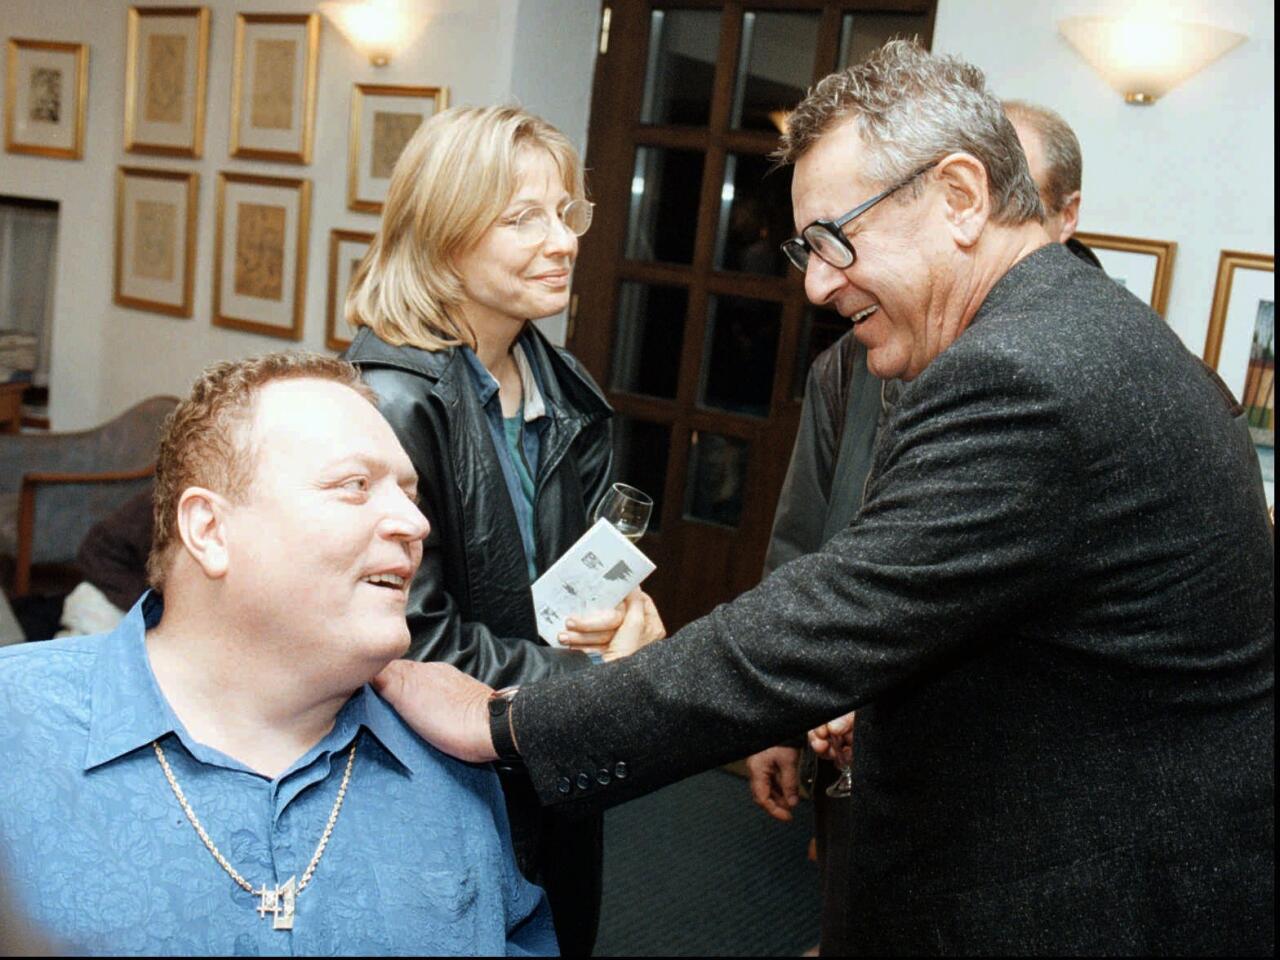 Milos Forman, right, with publisher Larry Flynt as they arrive at Hoffmeister Hotel in Prague, Czech Republic, in October 1996. Forman was in Prague to present "The People vs. Larry Flynt."